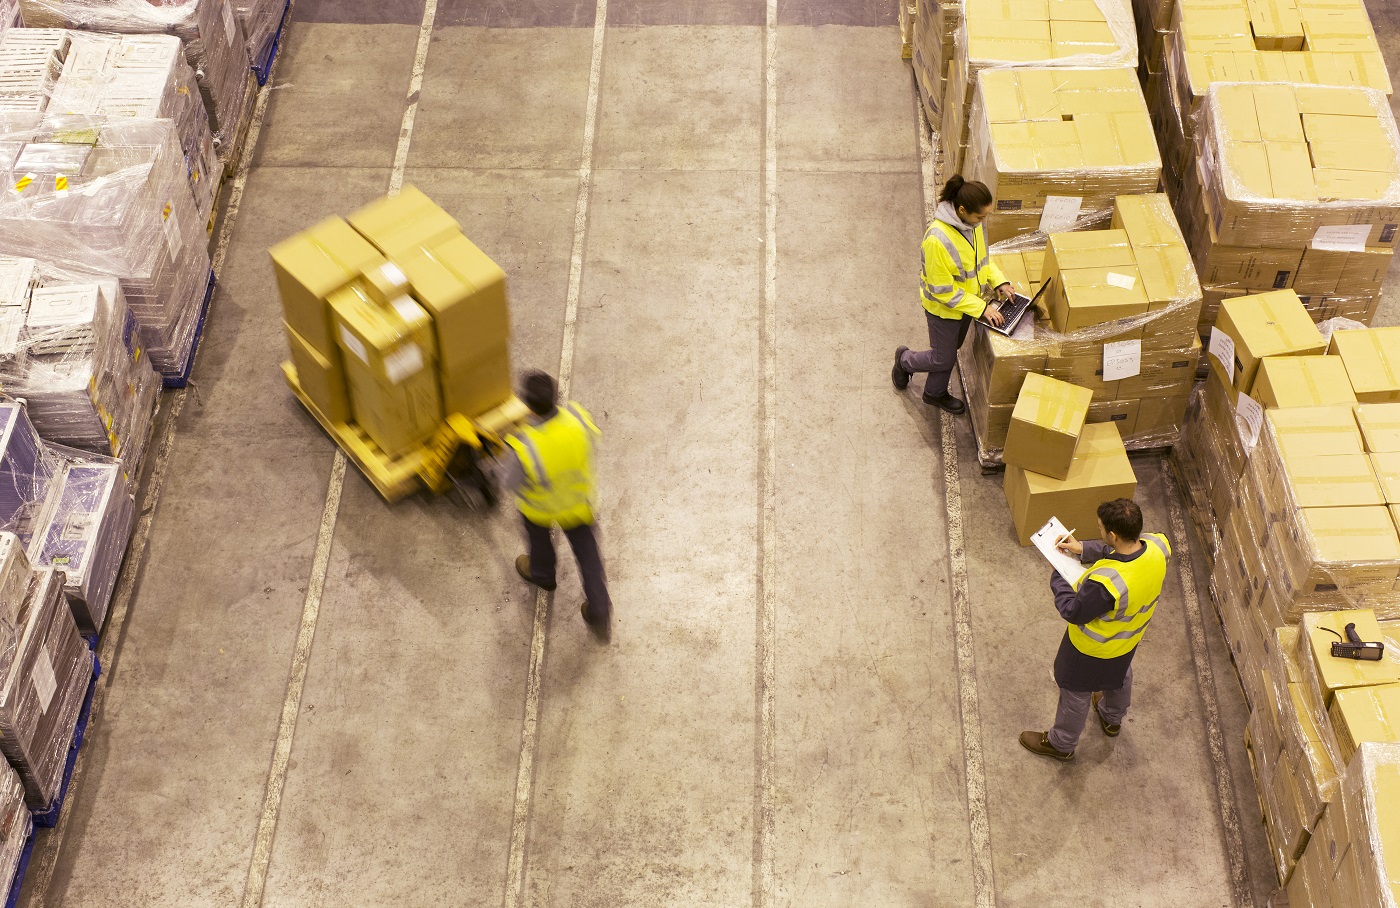 consolidated shipments in warehouse